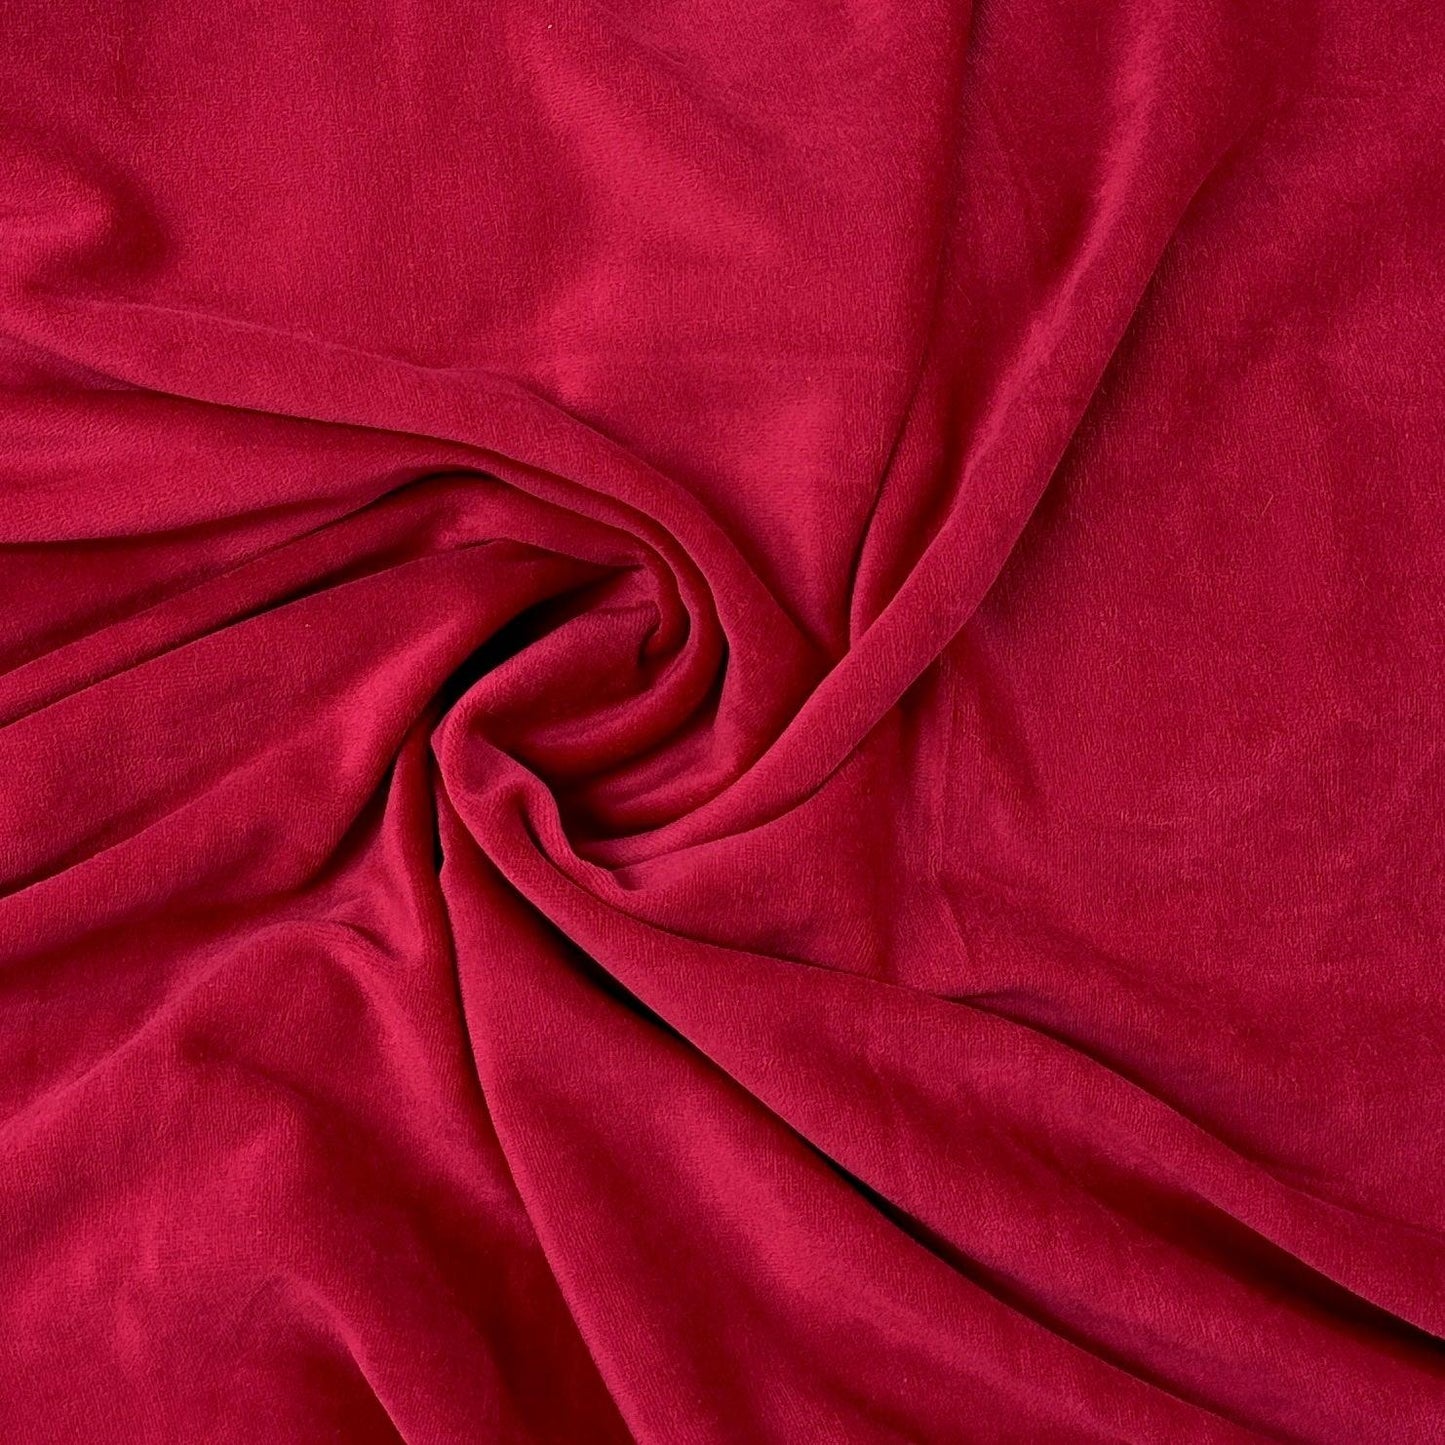 Organic Cotton Velour Fabric, $20.63/yd, 15 Yards - Made in the USA –  Nature's Fabrics